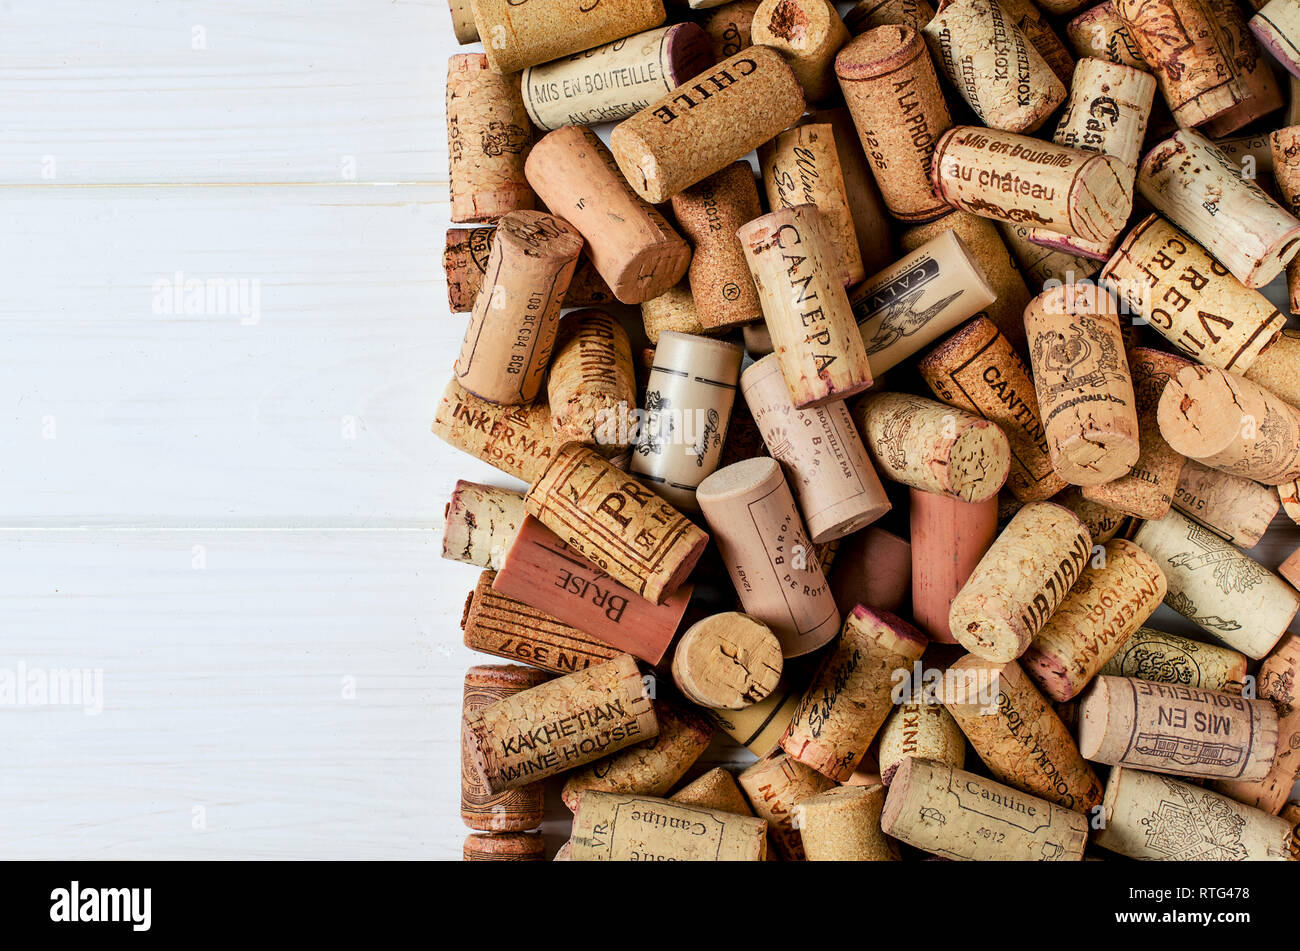 Used wine corks on sackcloth background with empty space for text. Colorful corks from white and red wine bottles Stock Photo